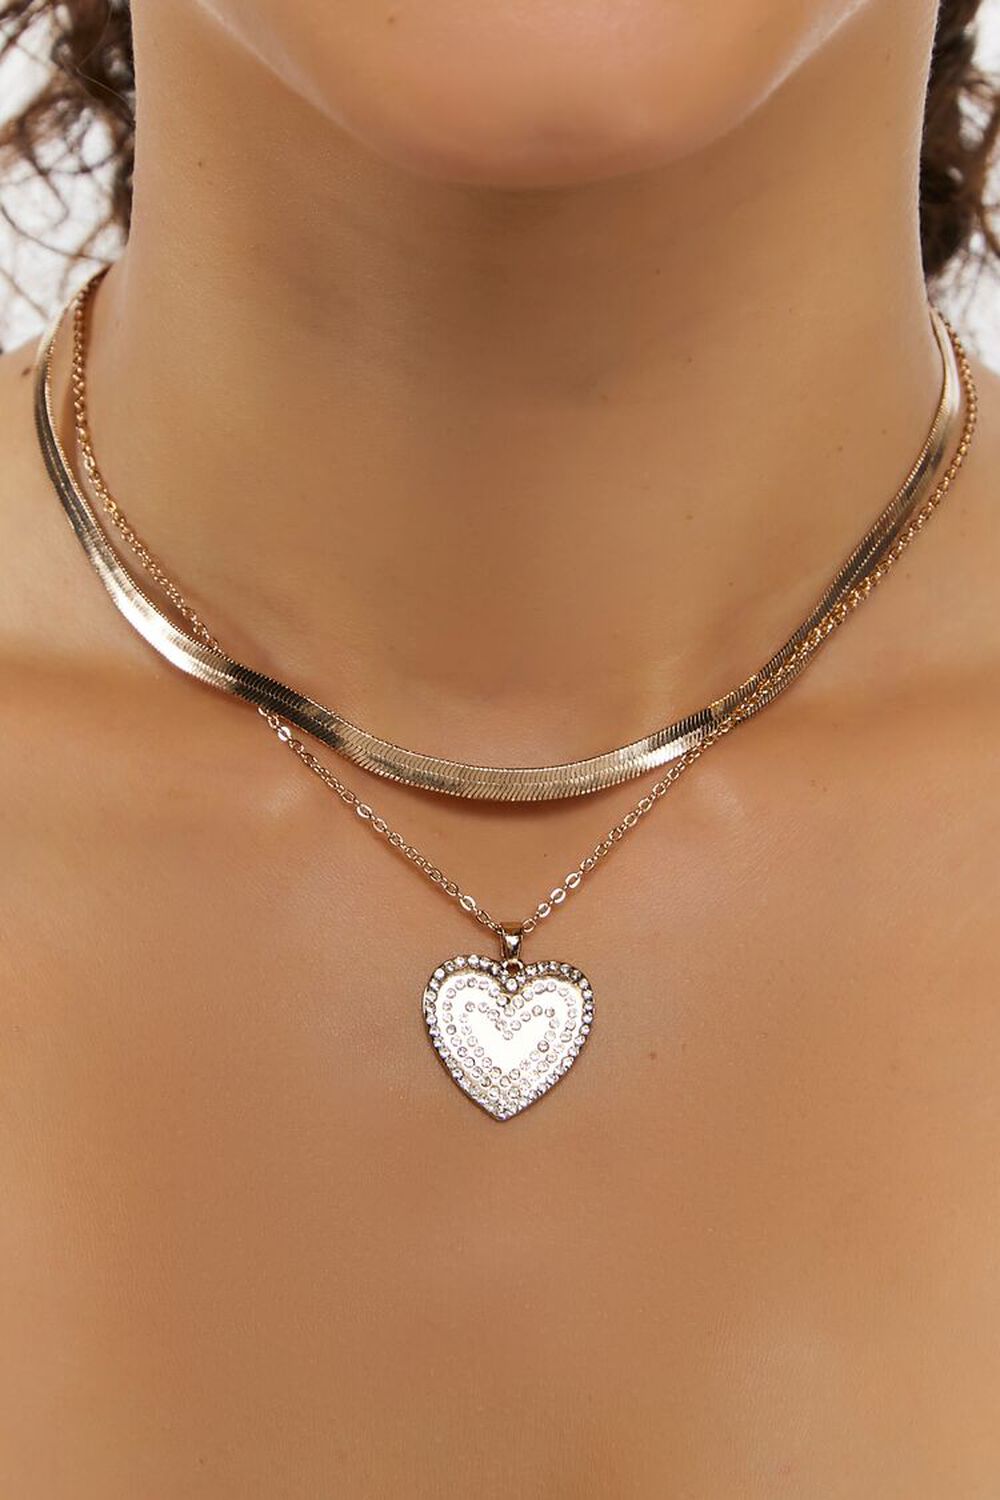 CLEAR/GOLD Heart Pendant Layered Necklace, image 1